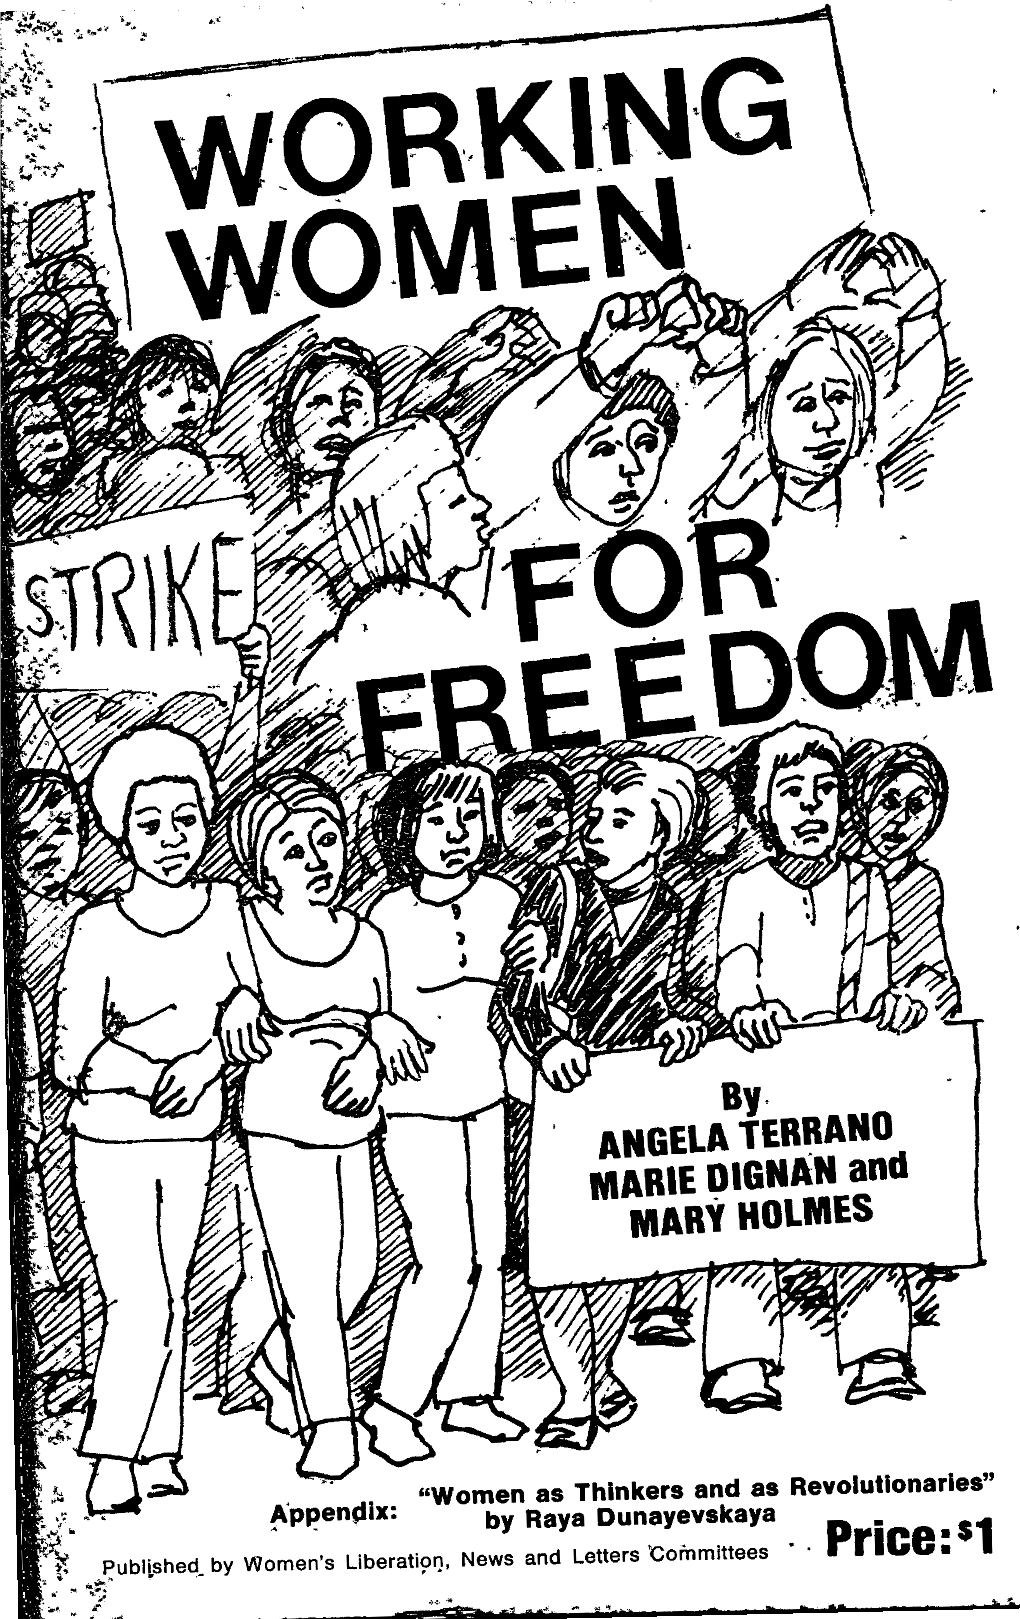 Working Women for Freedom